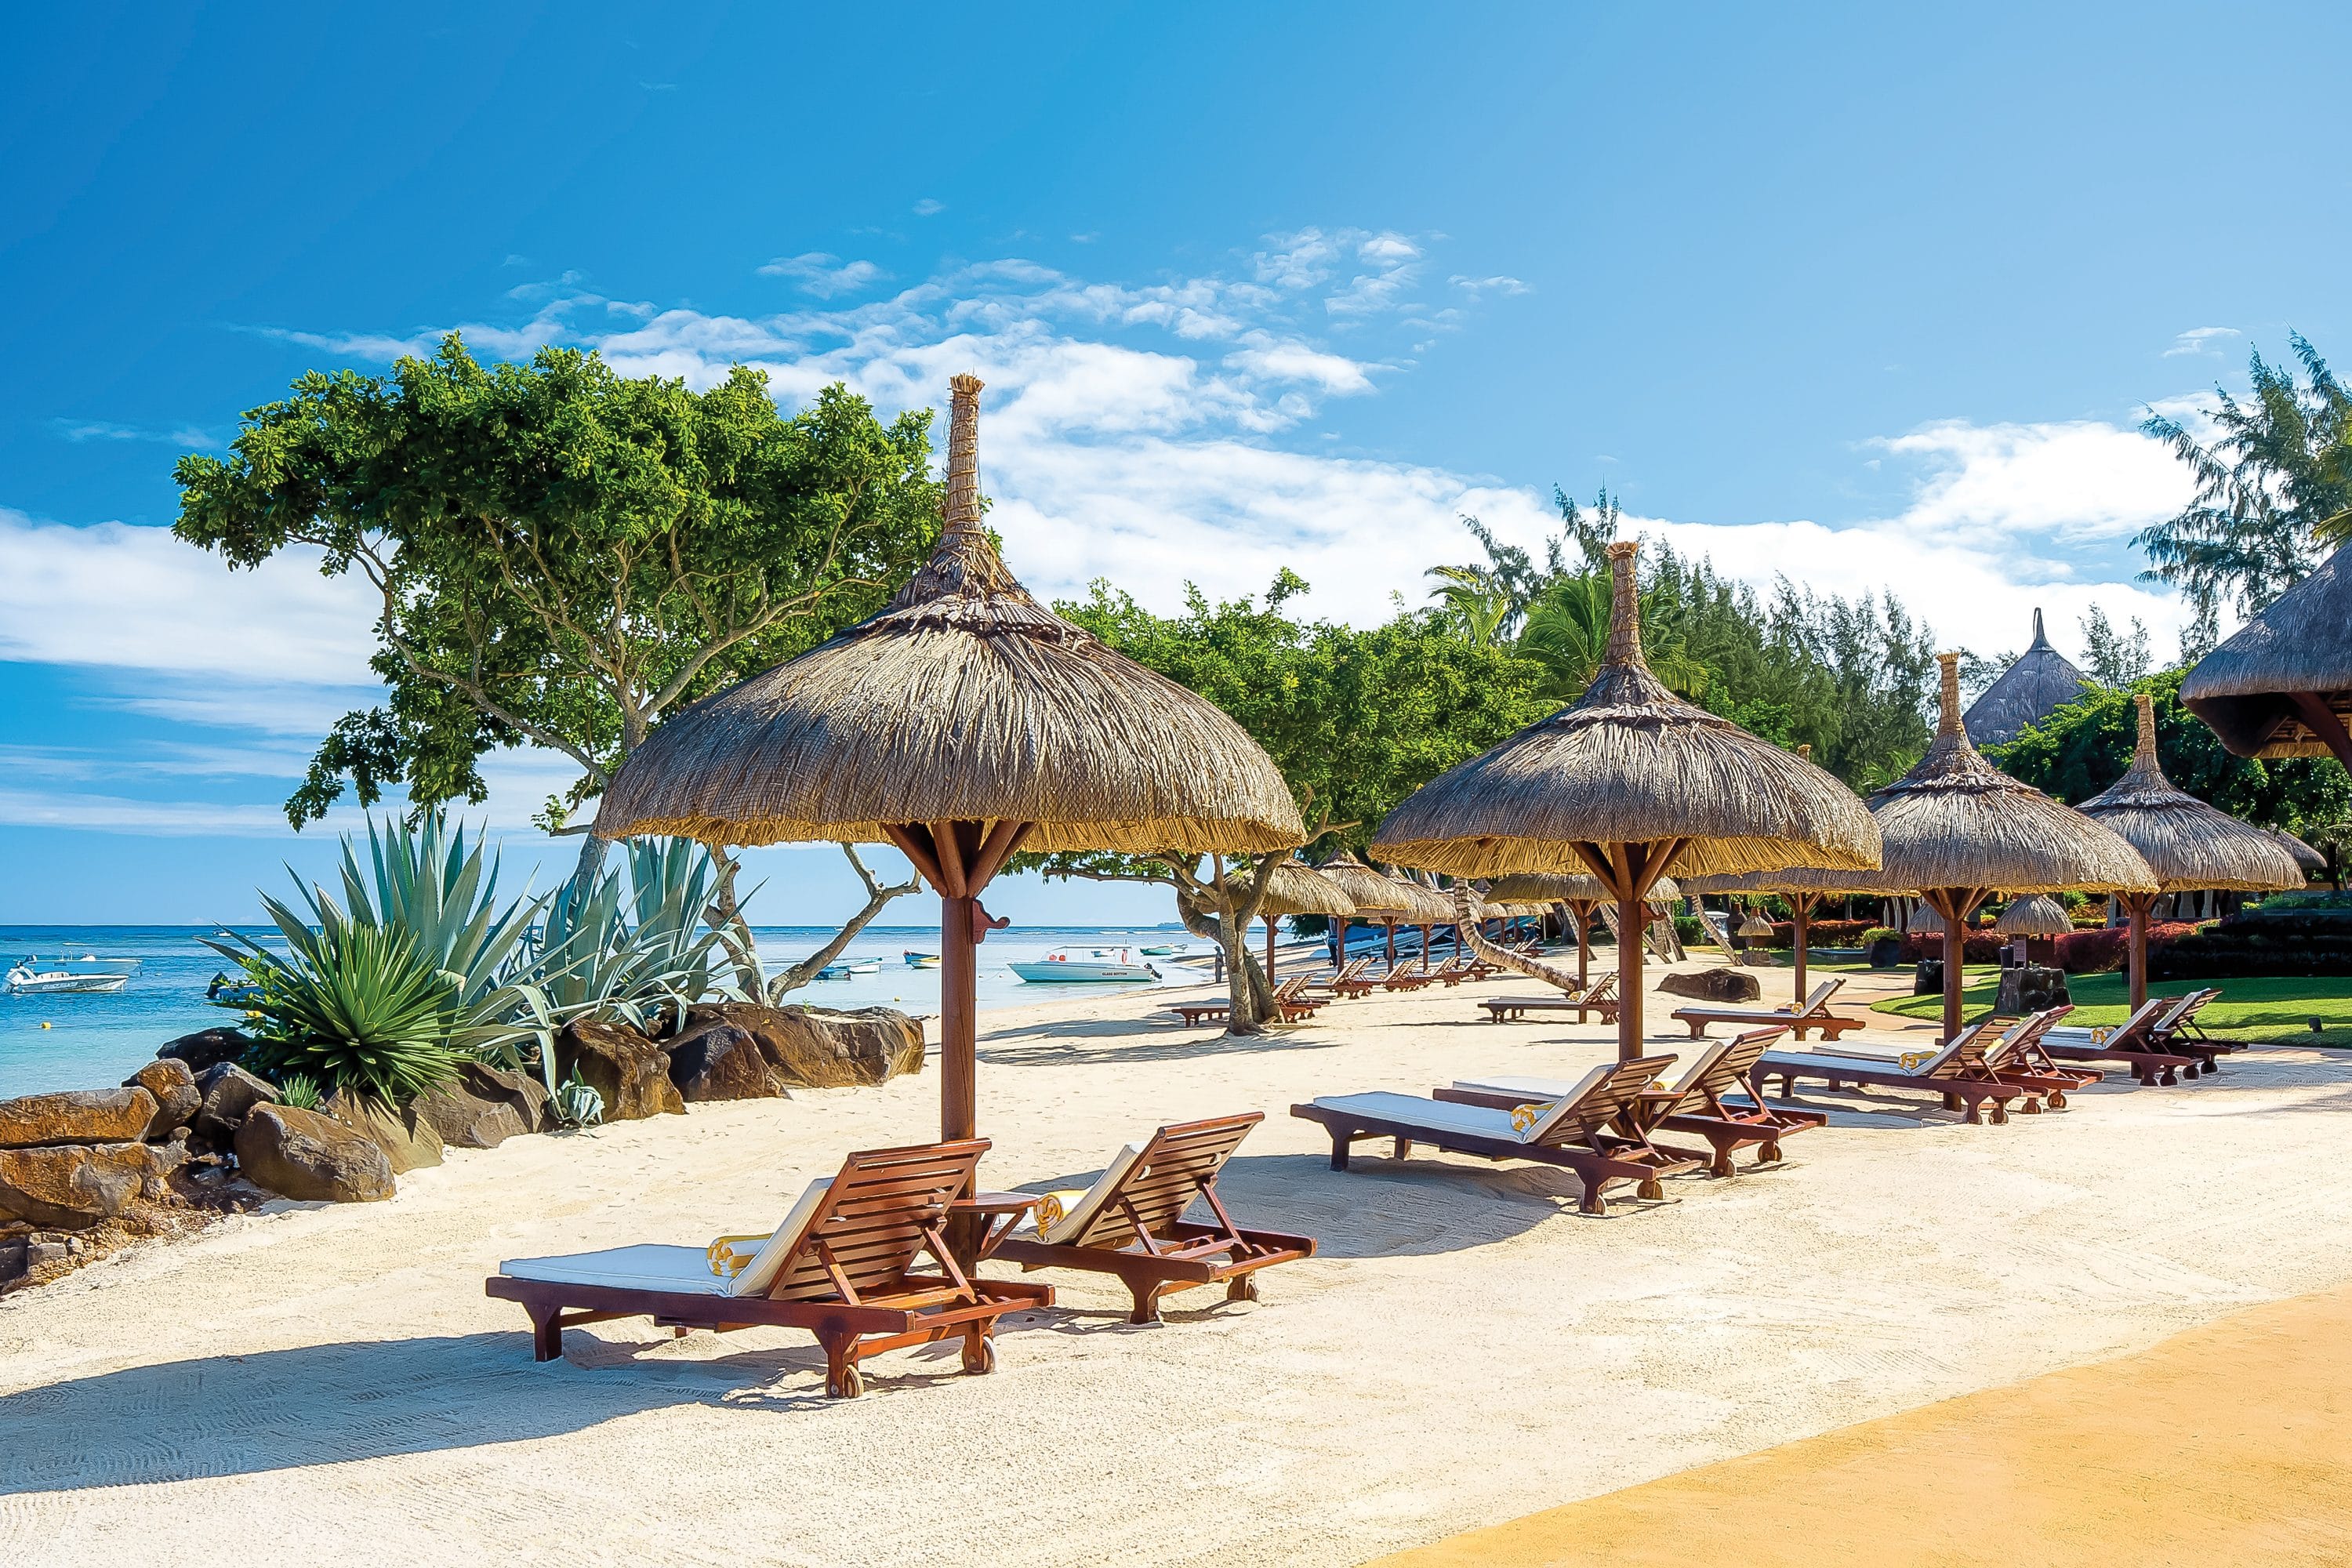 Sun loungers and umbrellas on beach in Mauritius